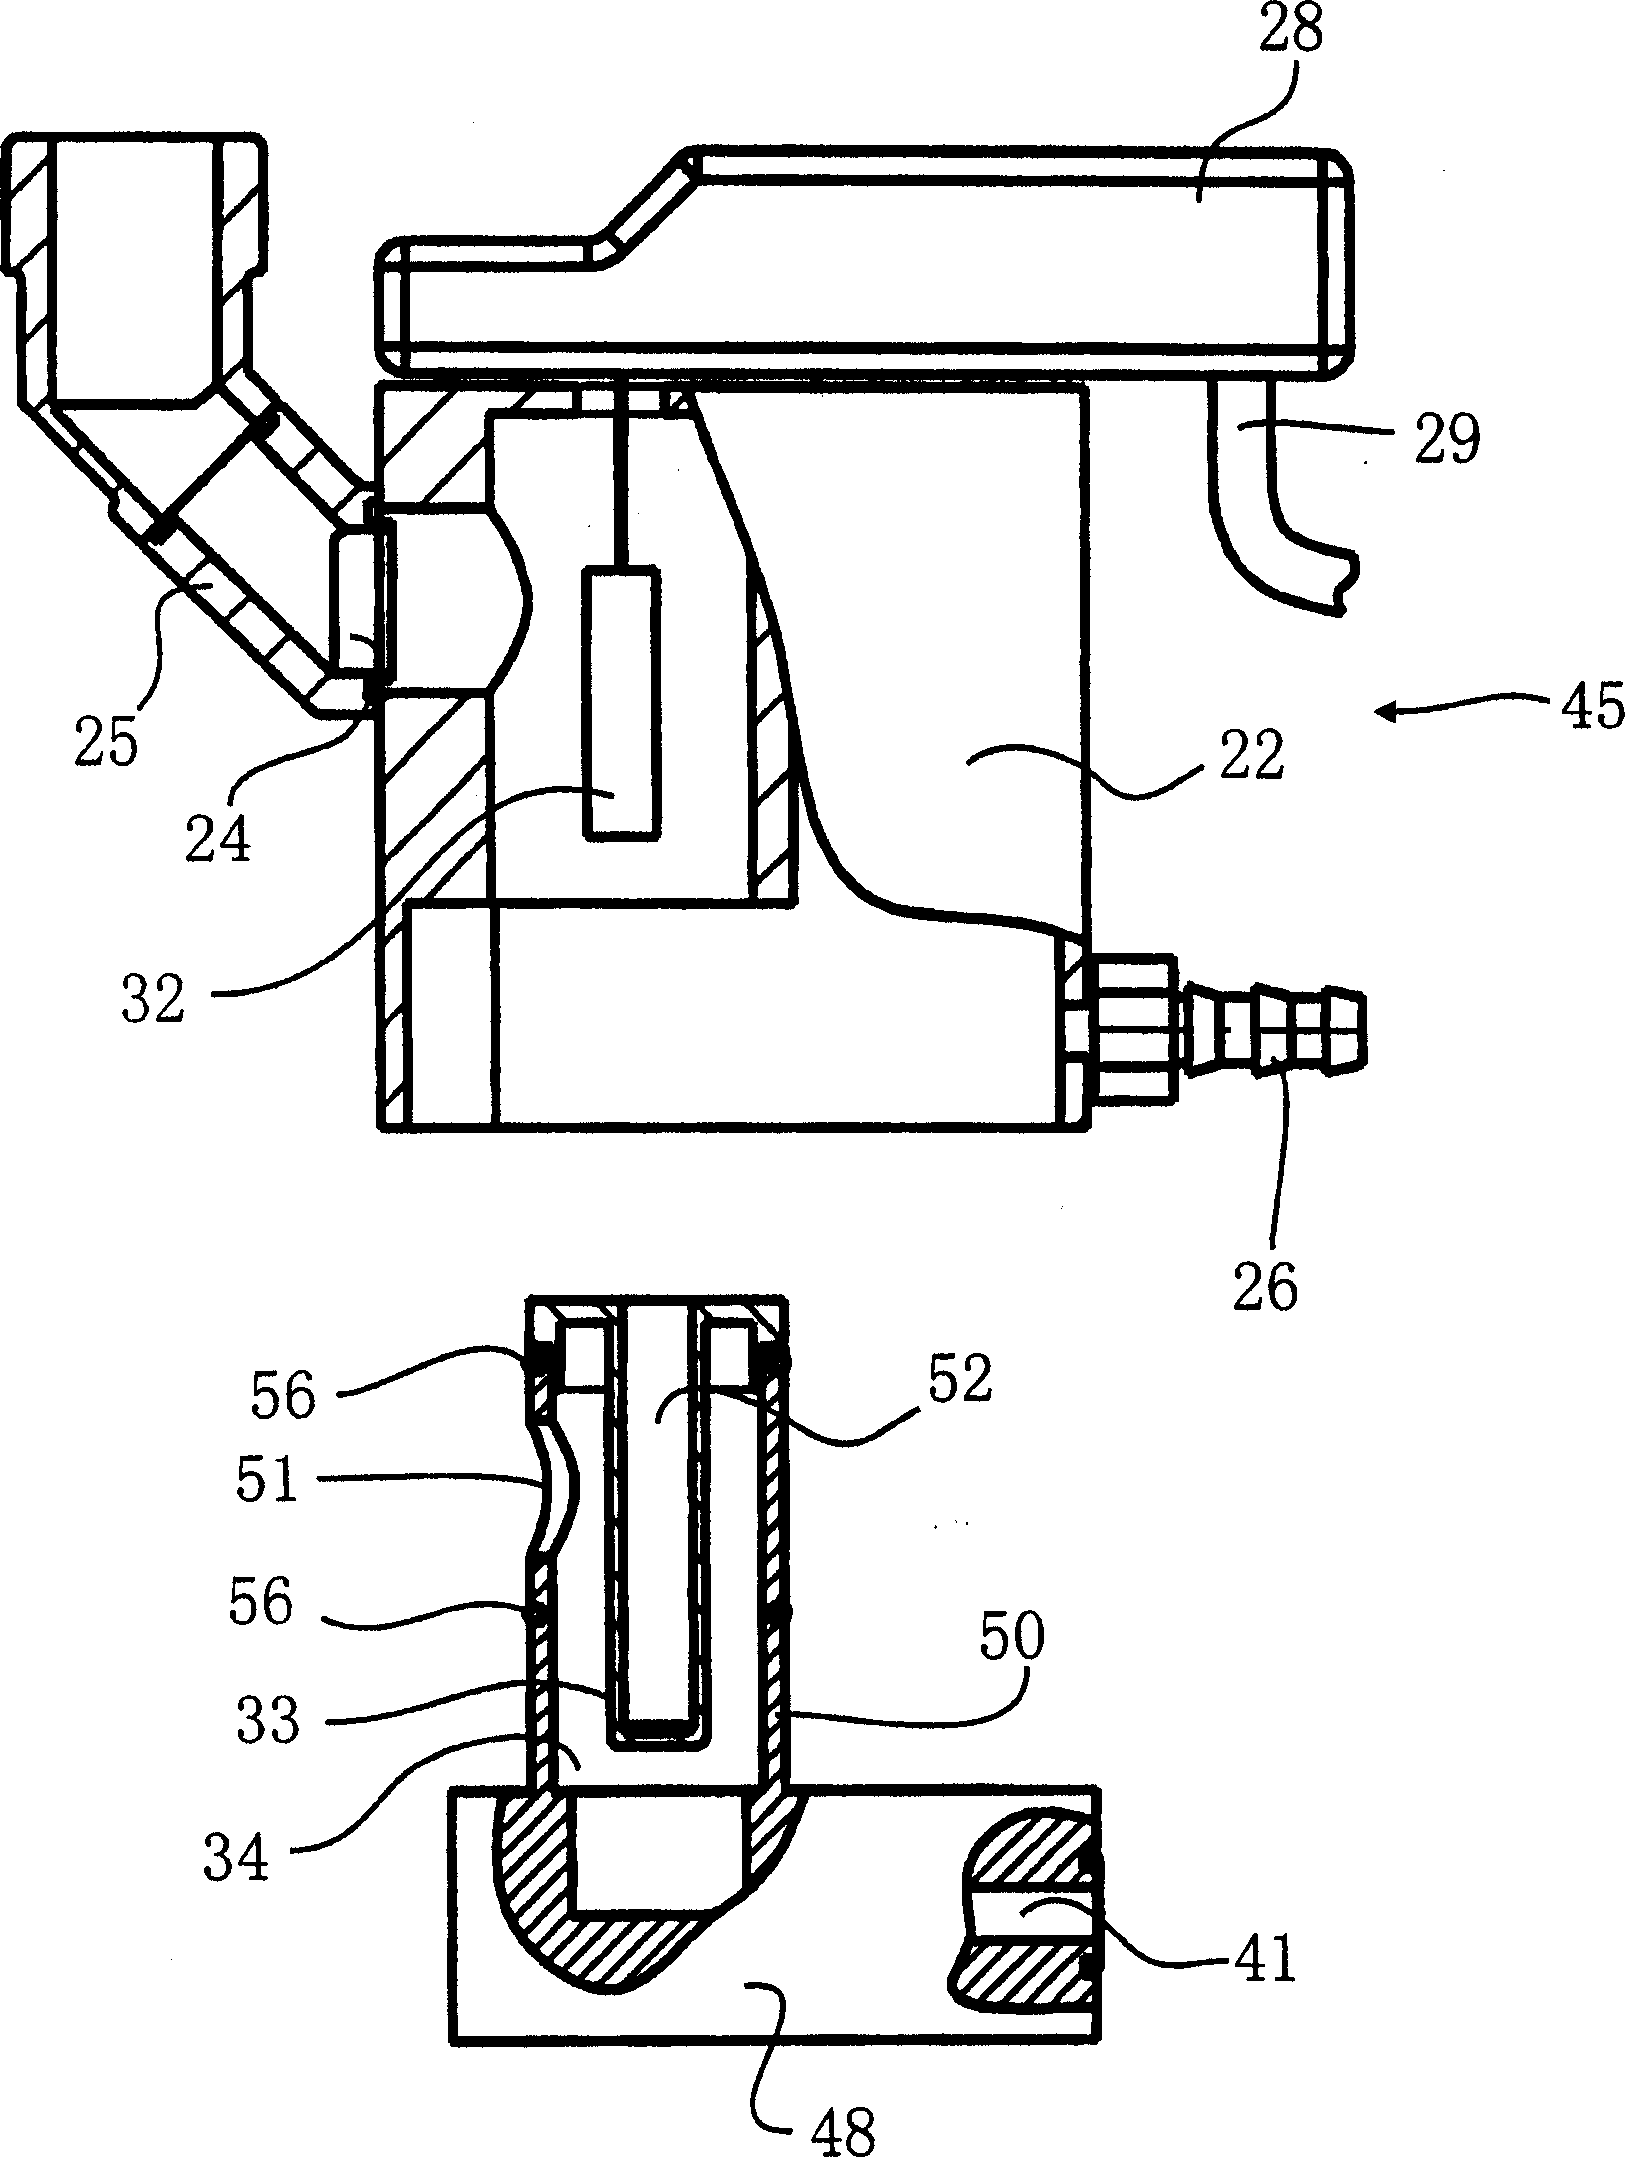 Condensate drainage with maintenance interface